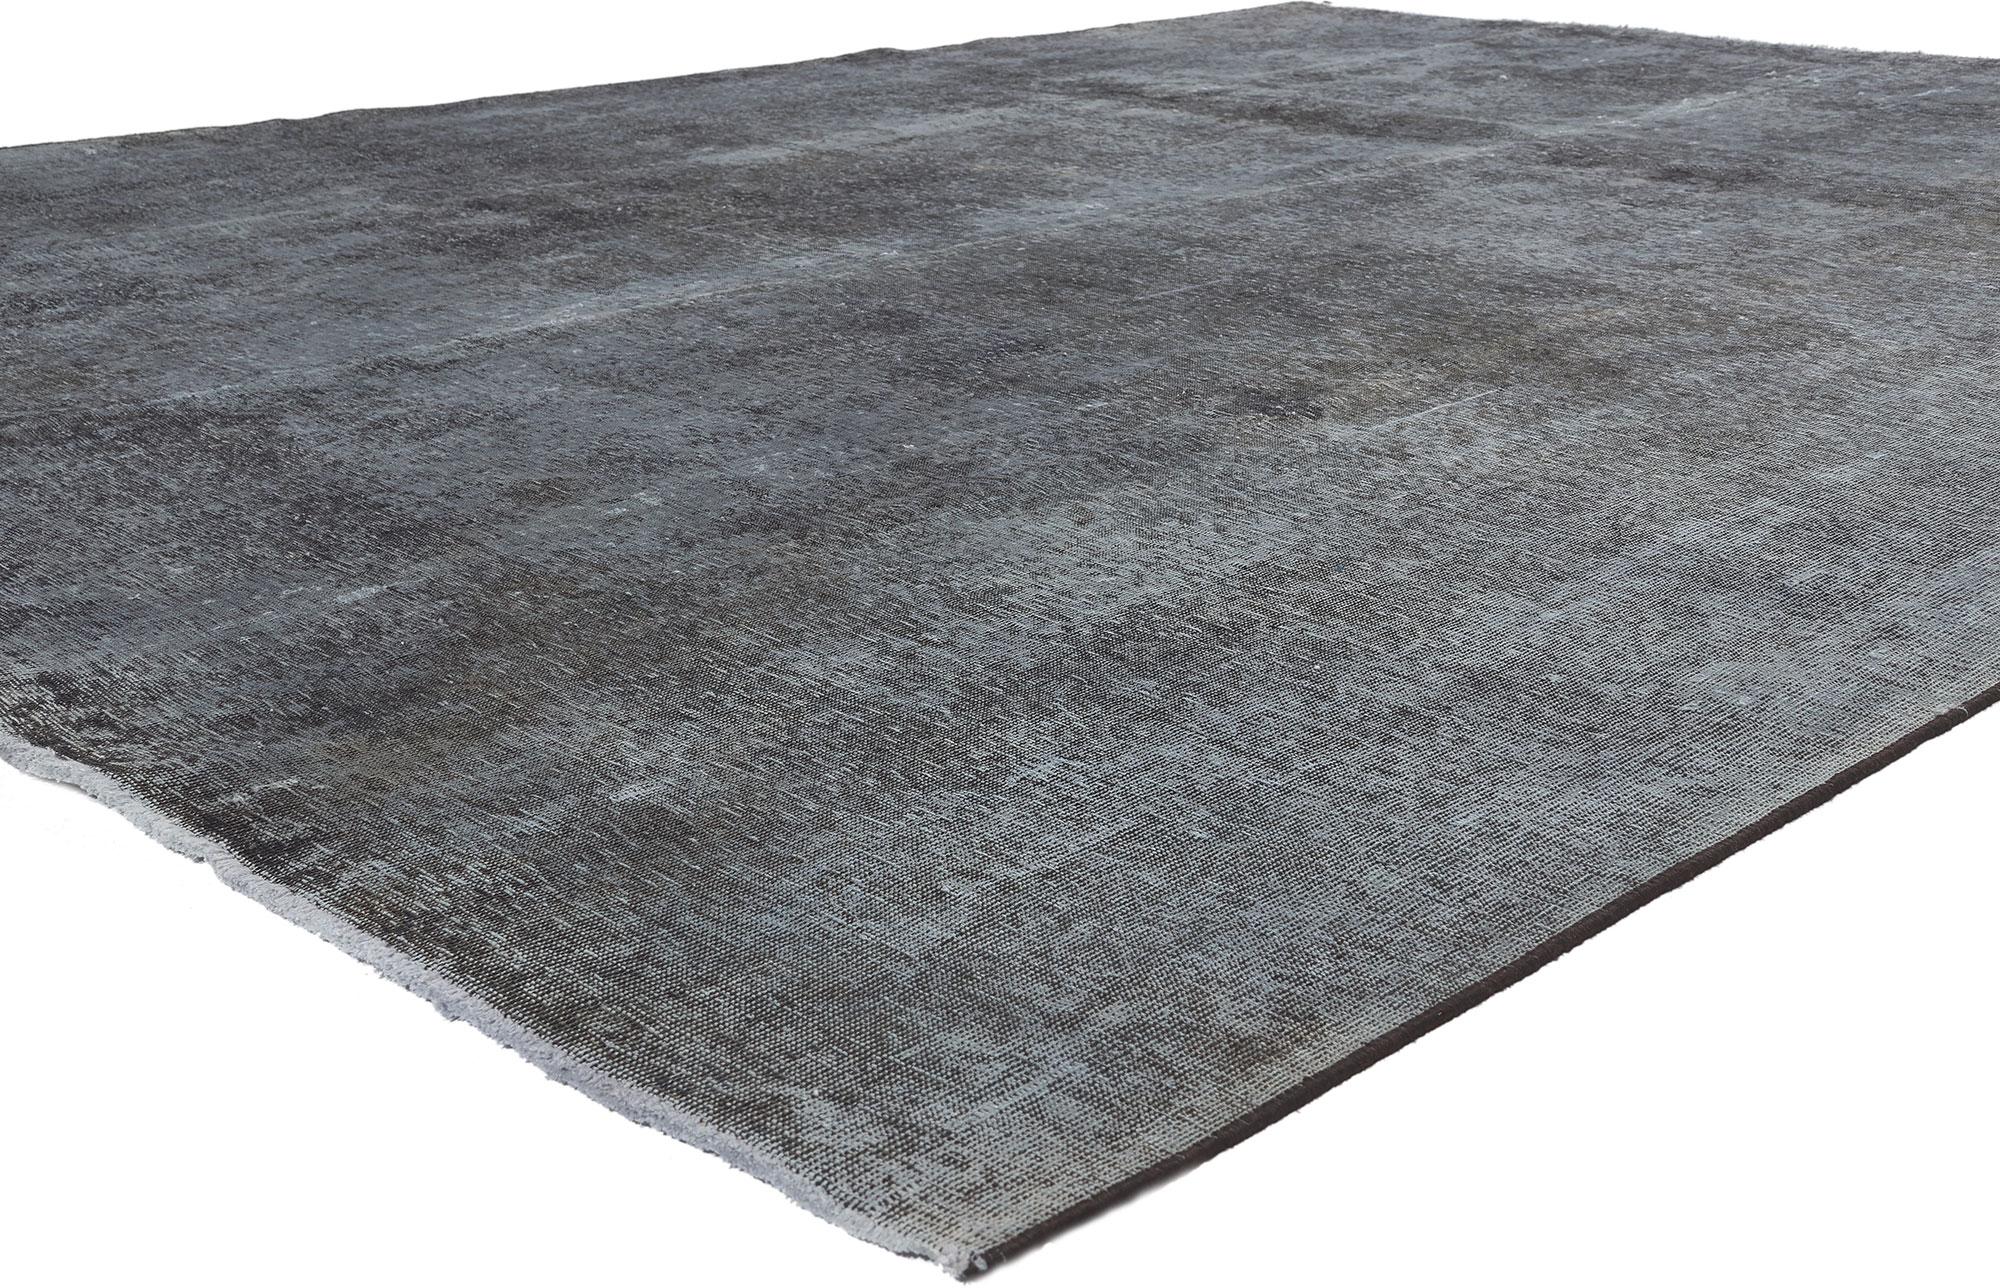 Vintage Persian Slate Gray Overdyed Rug with Modern Luxe Industrial Loft Style 1